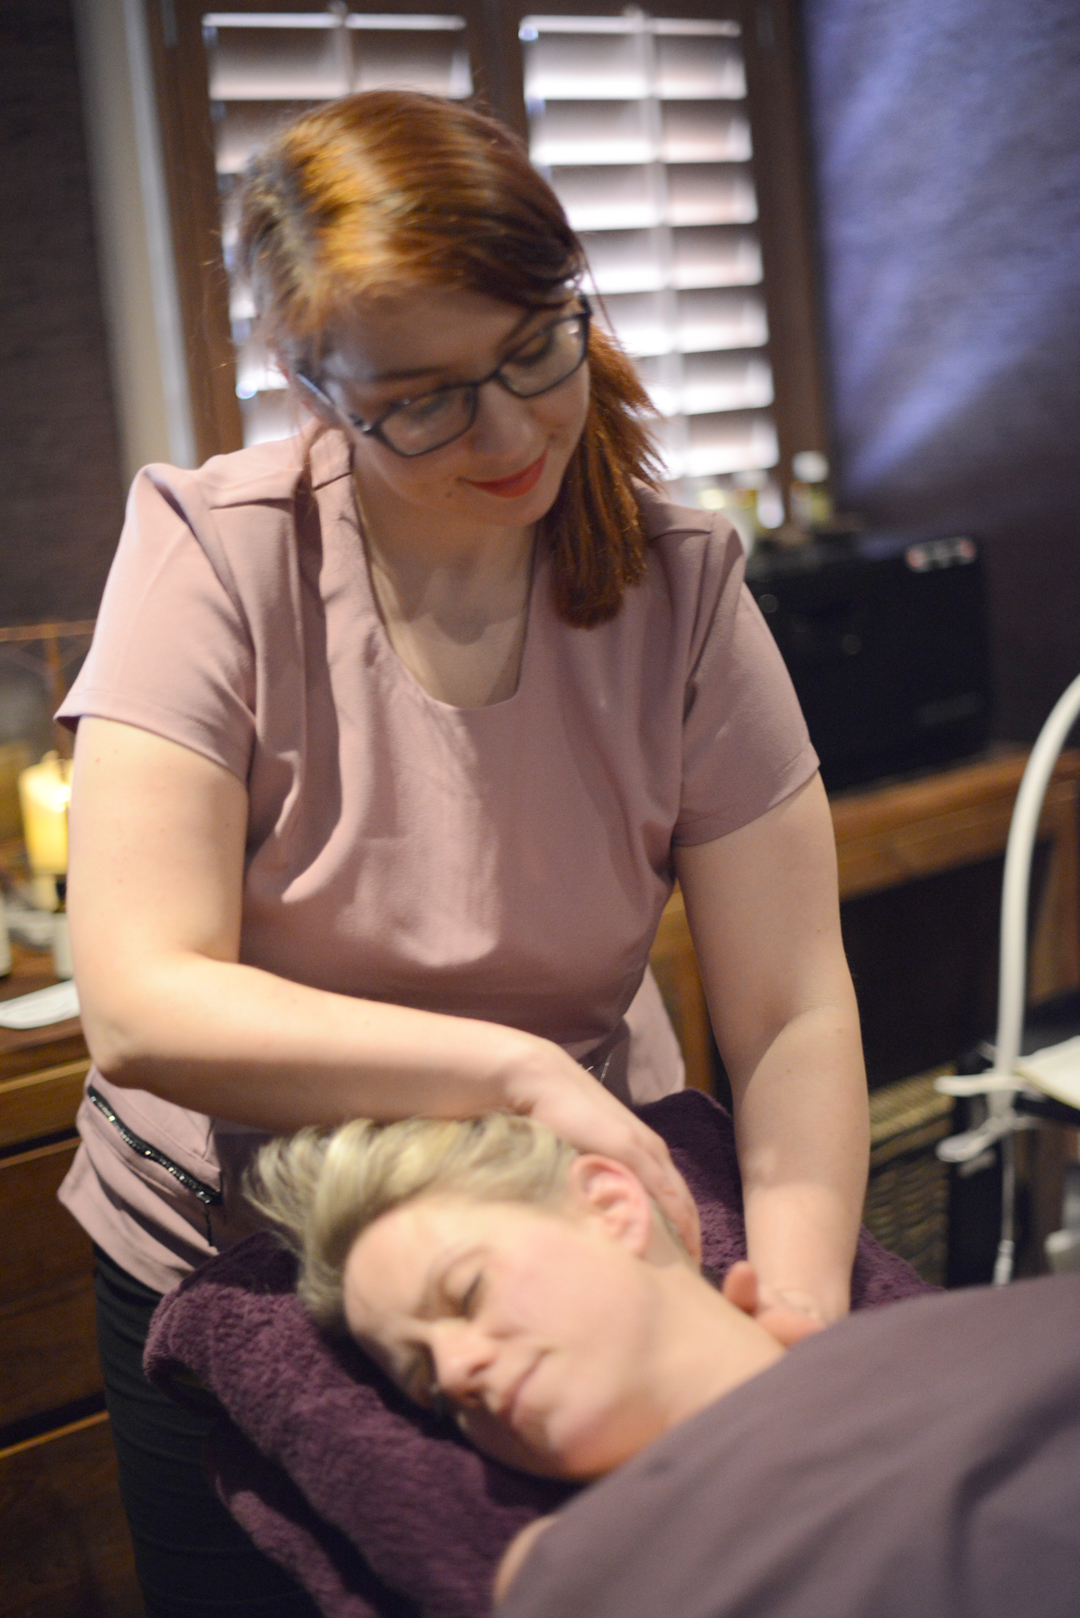 alex gorton from wear and where blog has a spa treatment at the aveda lifestyle salon and spa